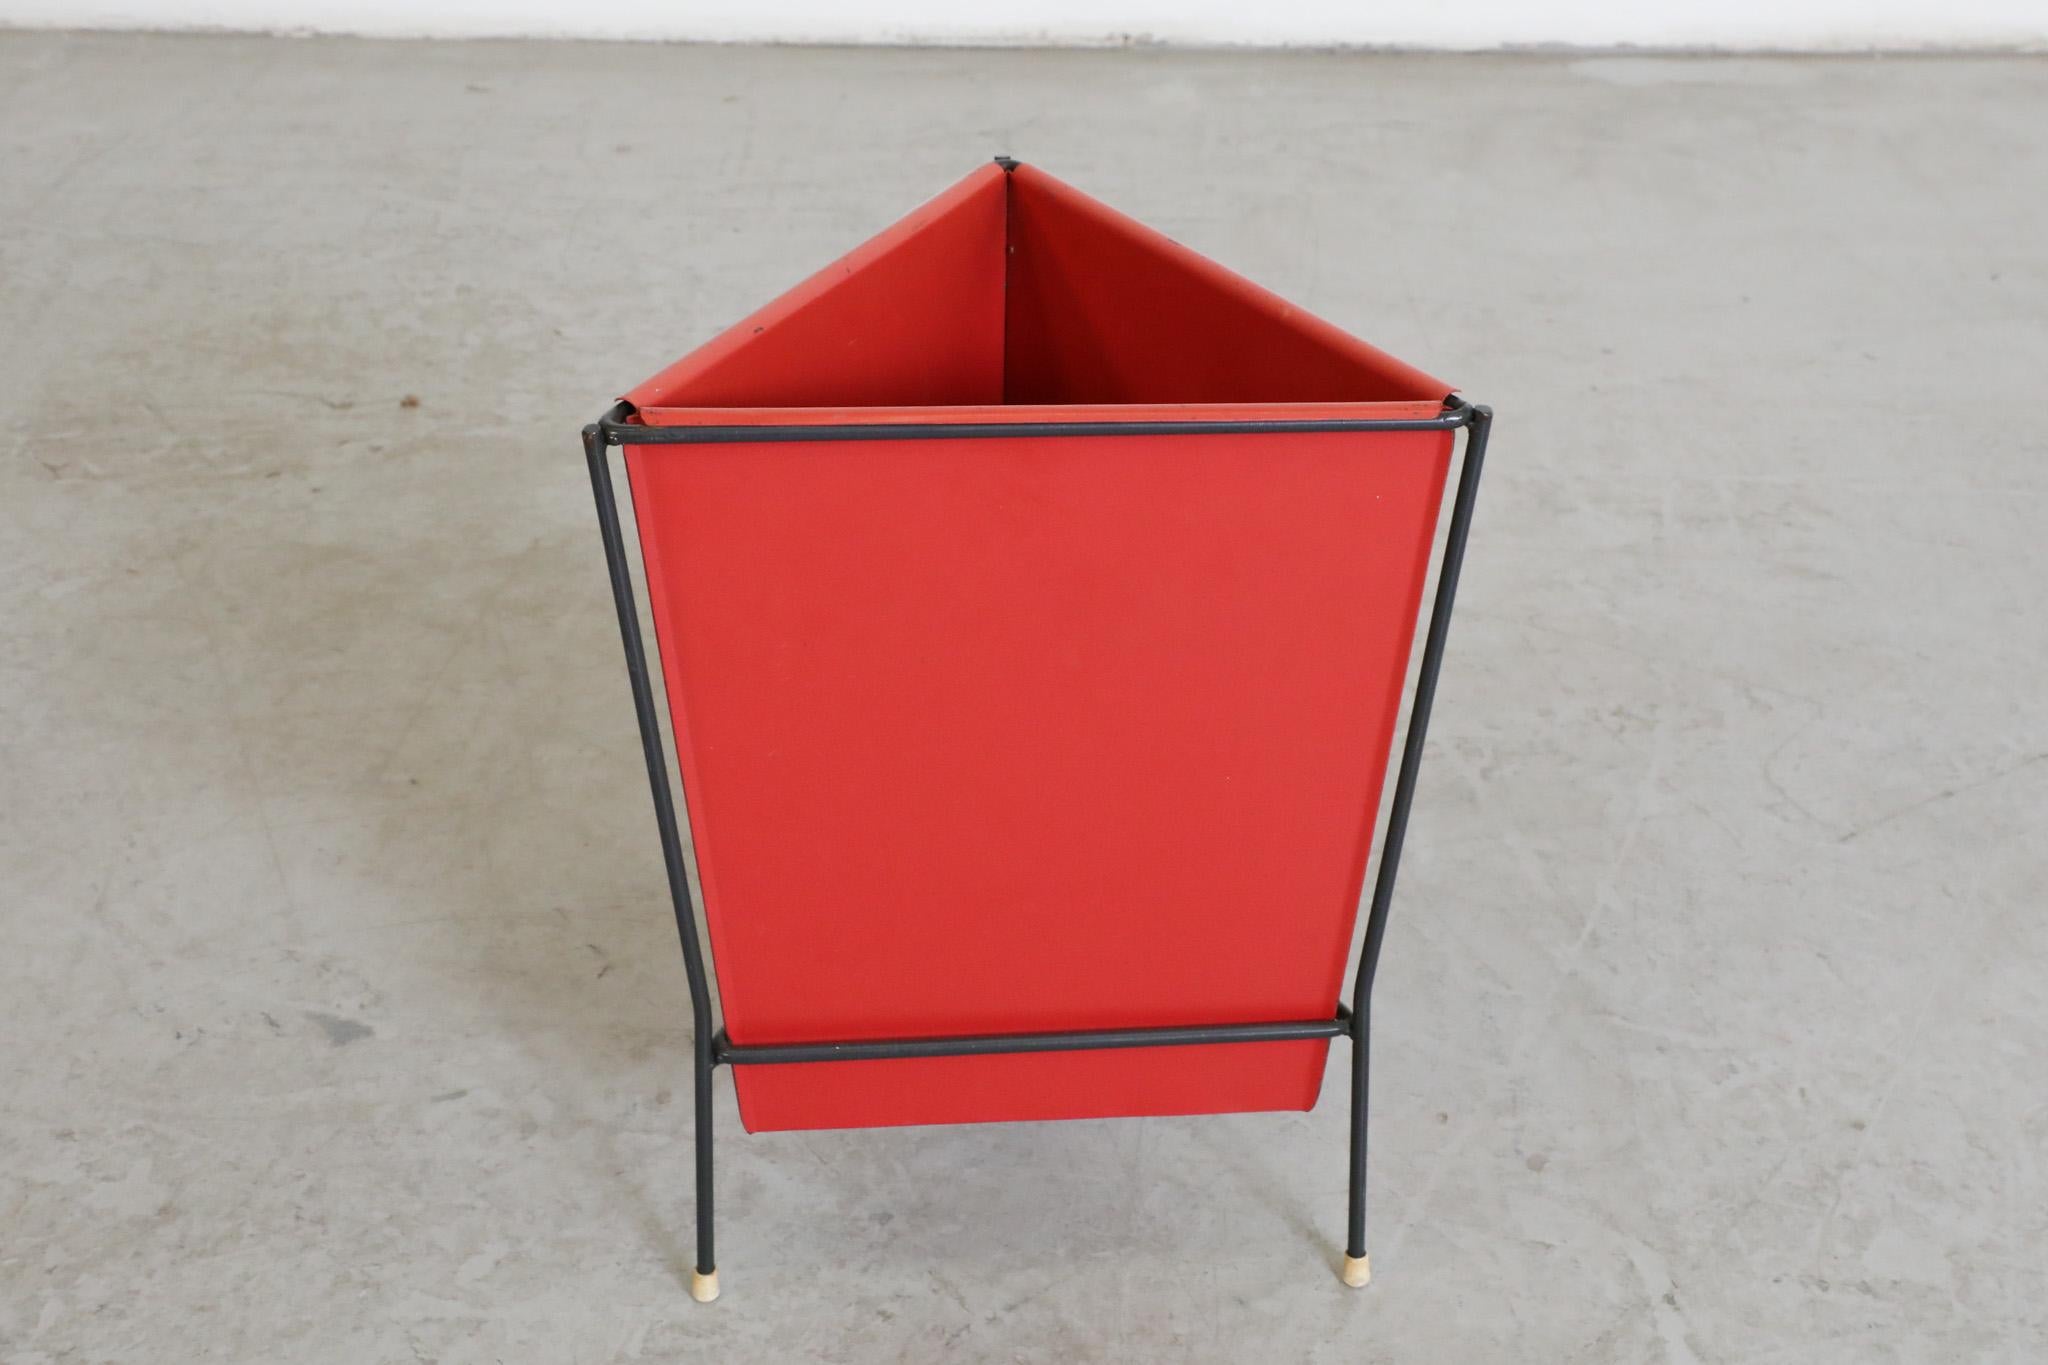 Pilastro Red Enameled Metal Triangle Bin with Black Frame For Sale 4